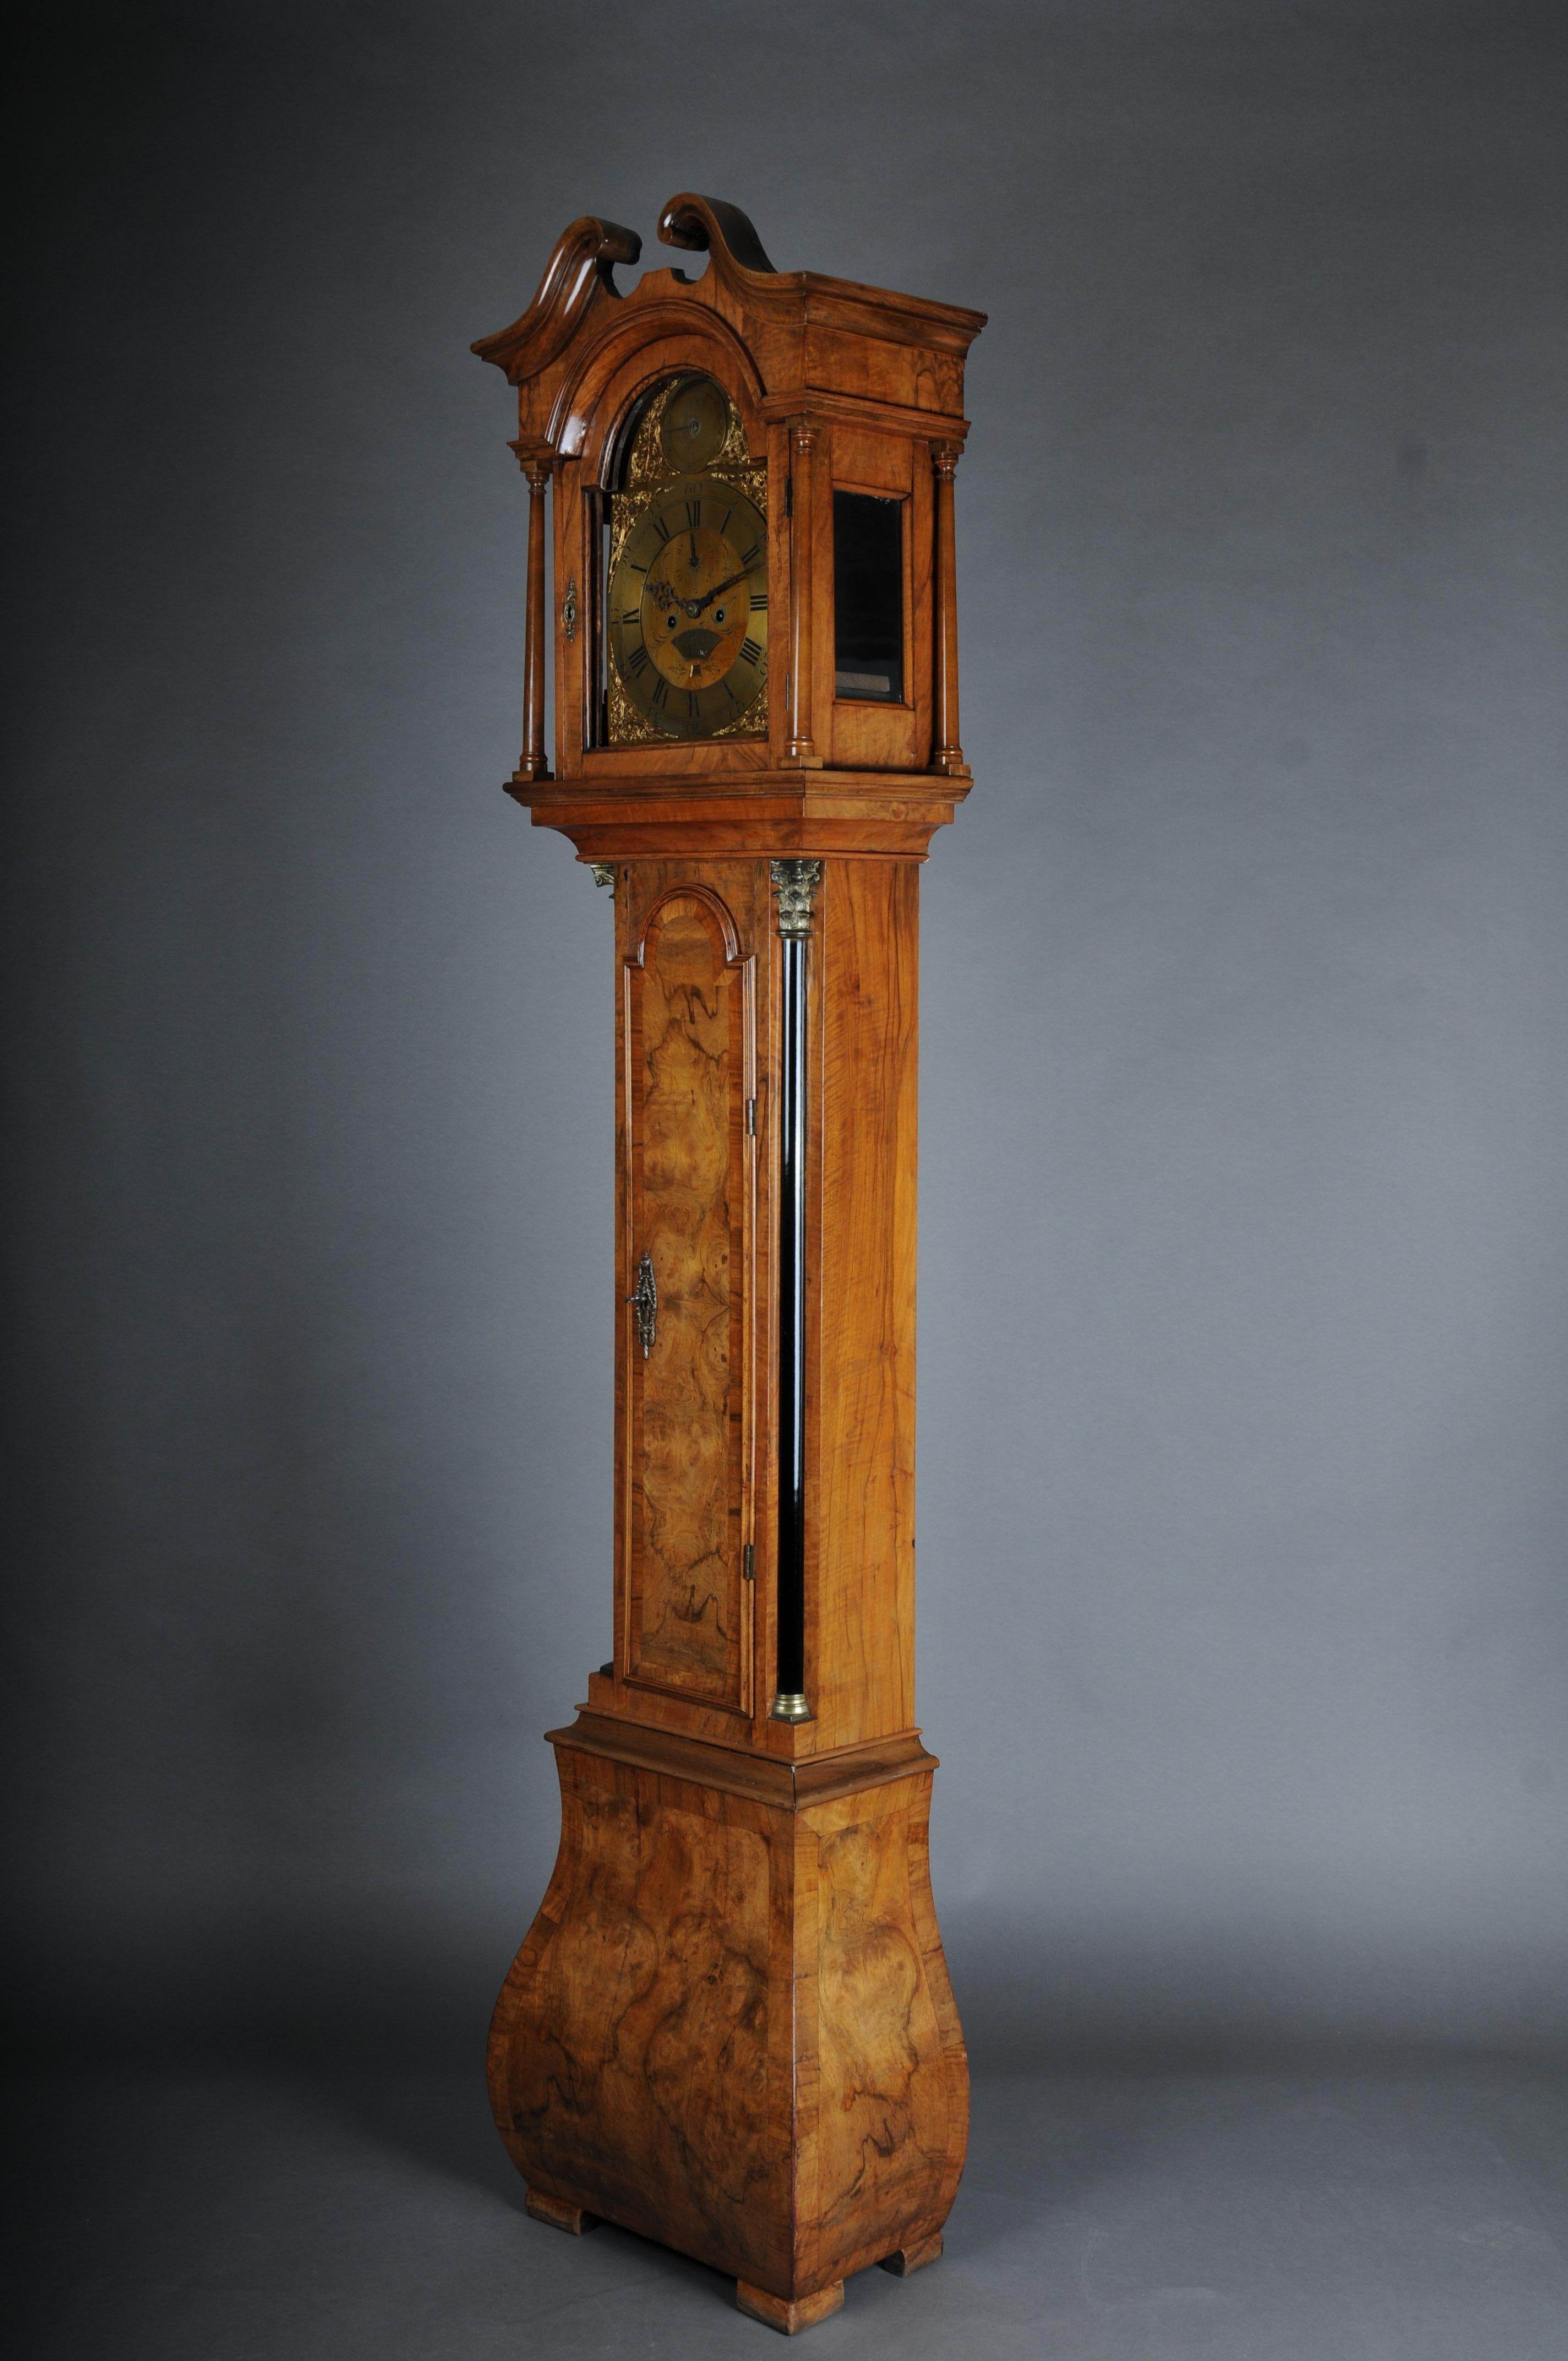 Beautiful antique English grandfather clock, oak, around 1800

walnut/burr wood. Case with ebonized half columns. Glazed, single-door head with solid columns. Brass dial with black Roman numerals, auxiliary dial 